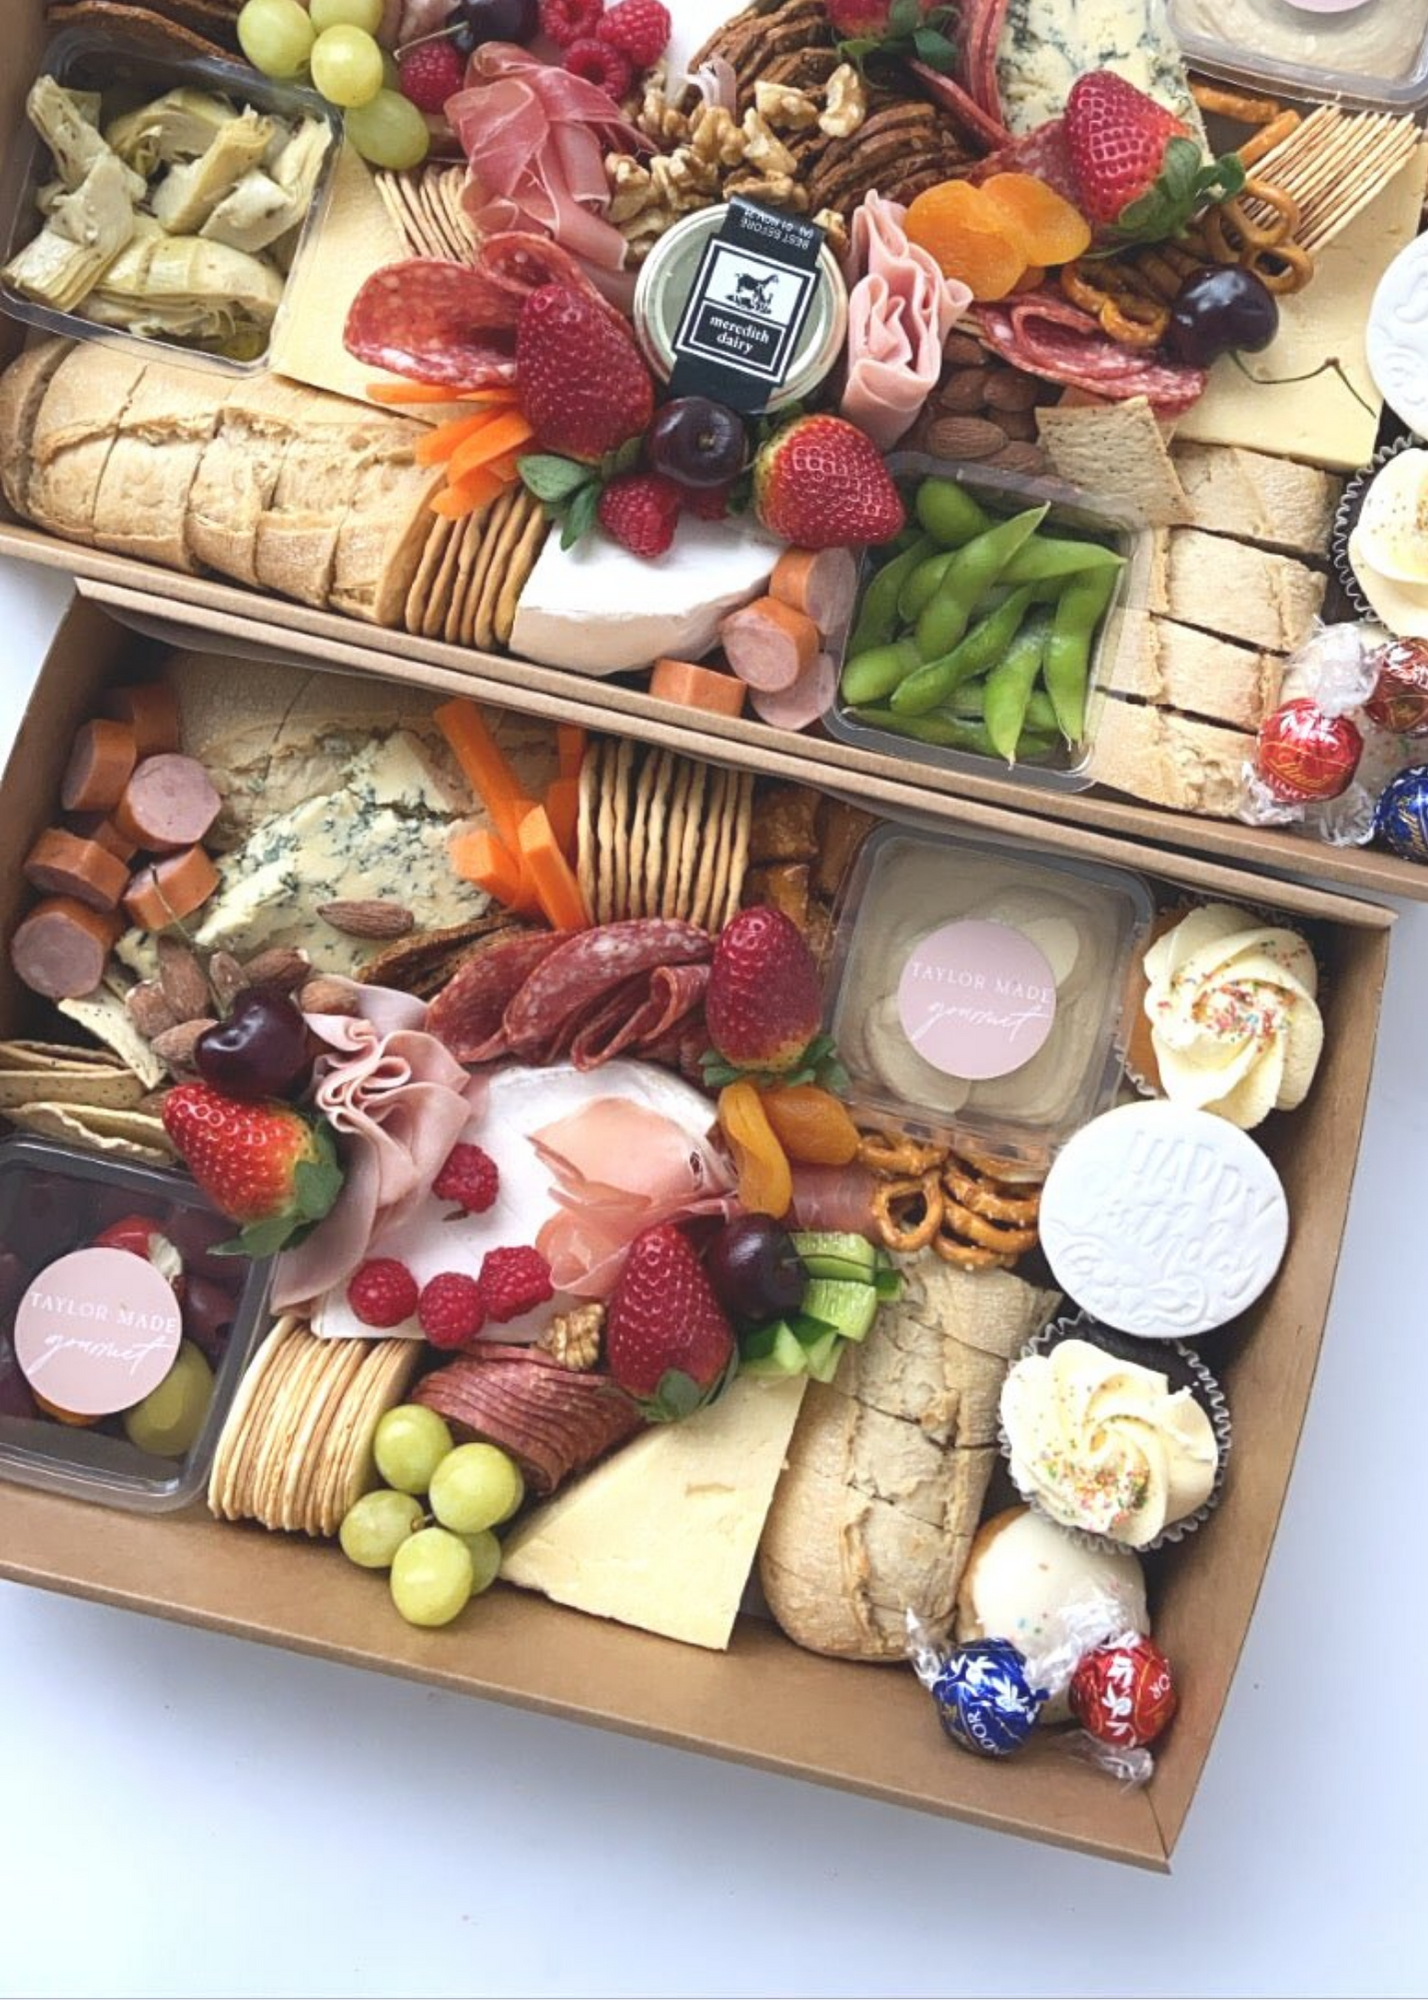 Family size picnic grazing box by Taylor Made Gourmet, Melbourne